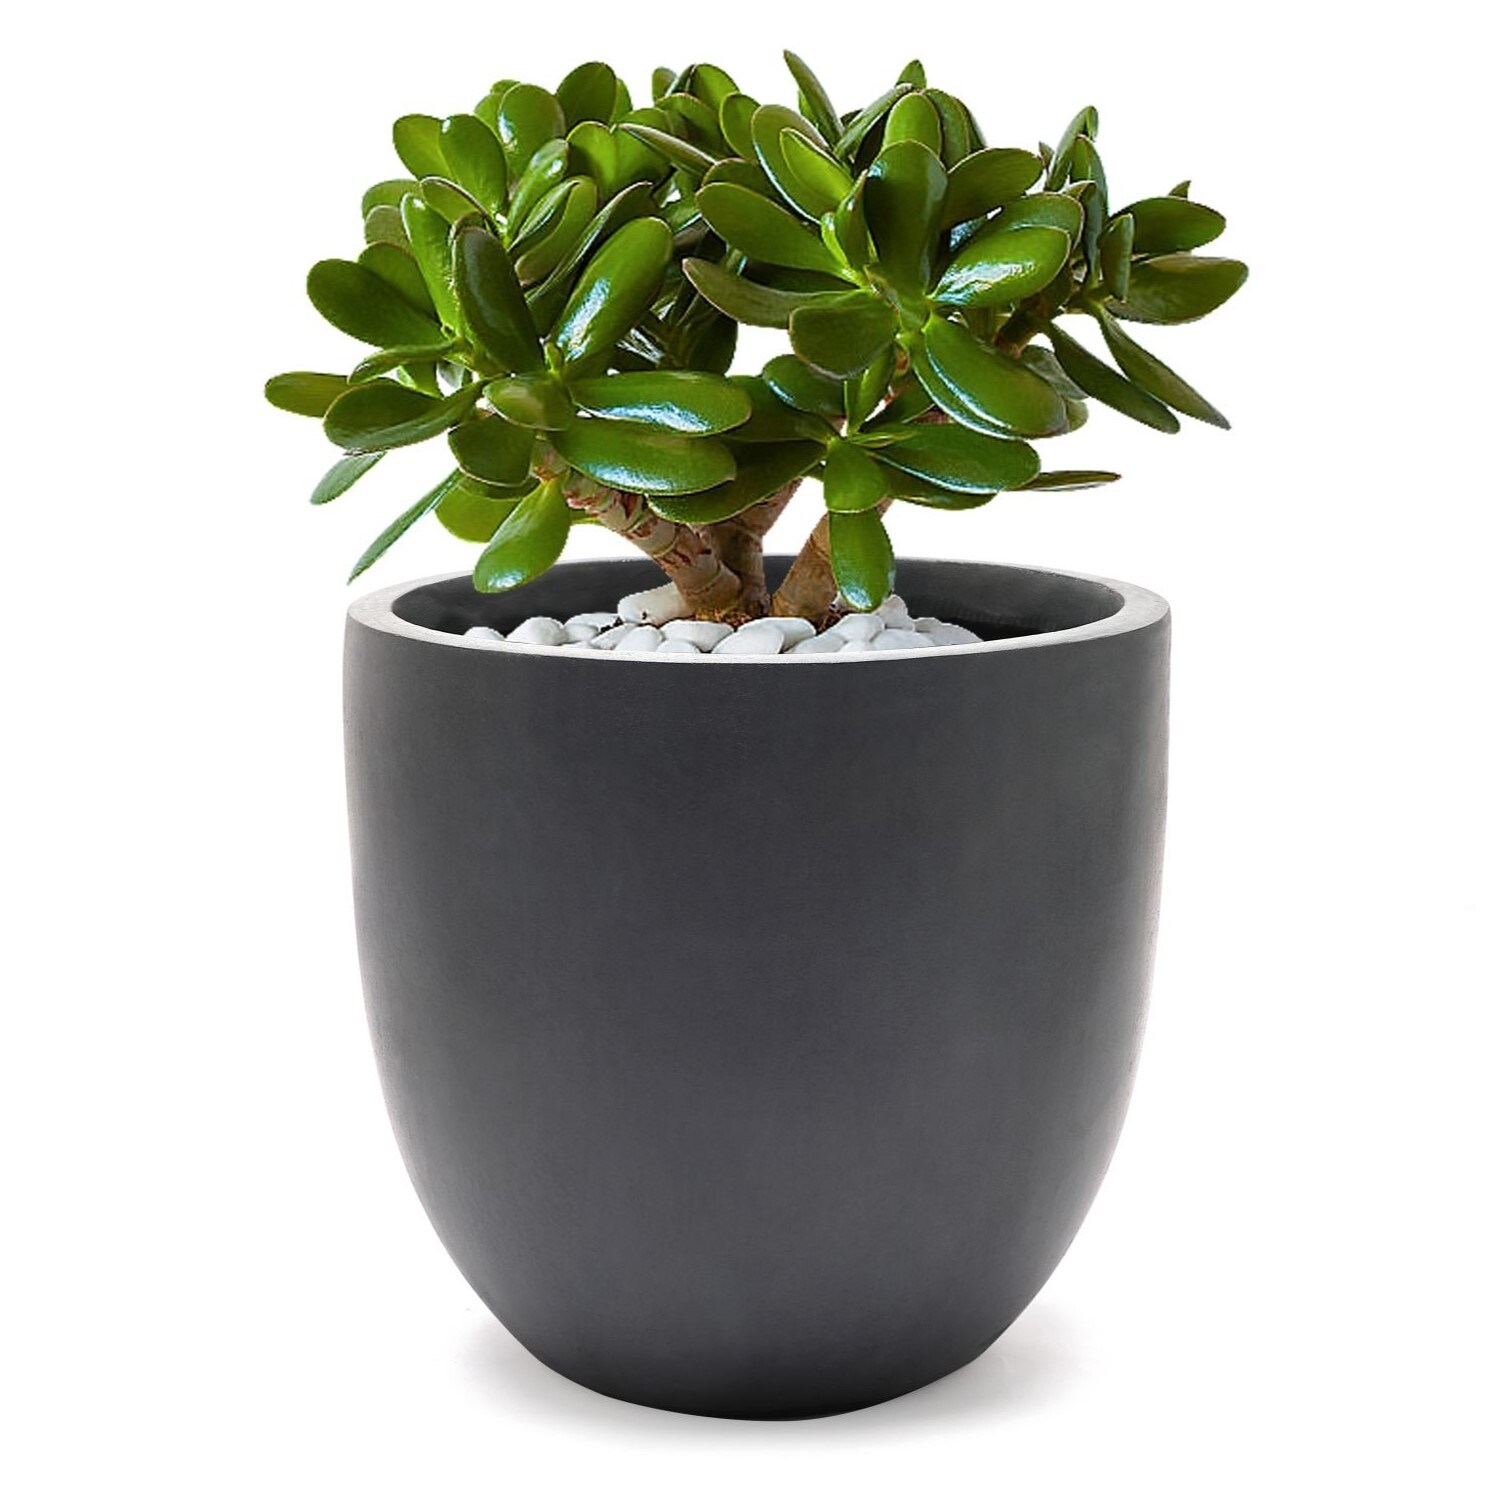 https://ak1.ostkcdn.com/images/products/is/images/direct/2dd82d394fb6f2a7f7bca702ad954f79f96fcf75/Round-MgO-Indoor---Outdoor-Planter.jpg